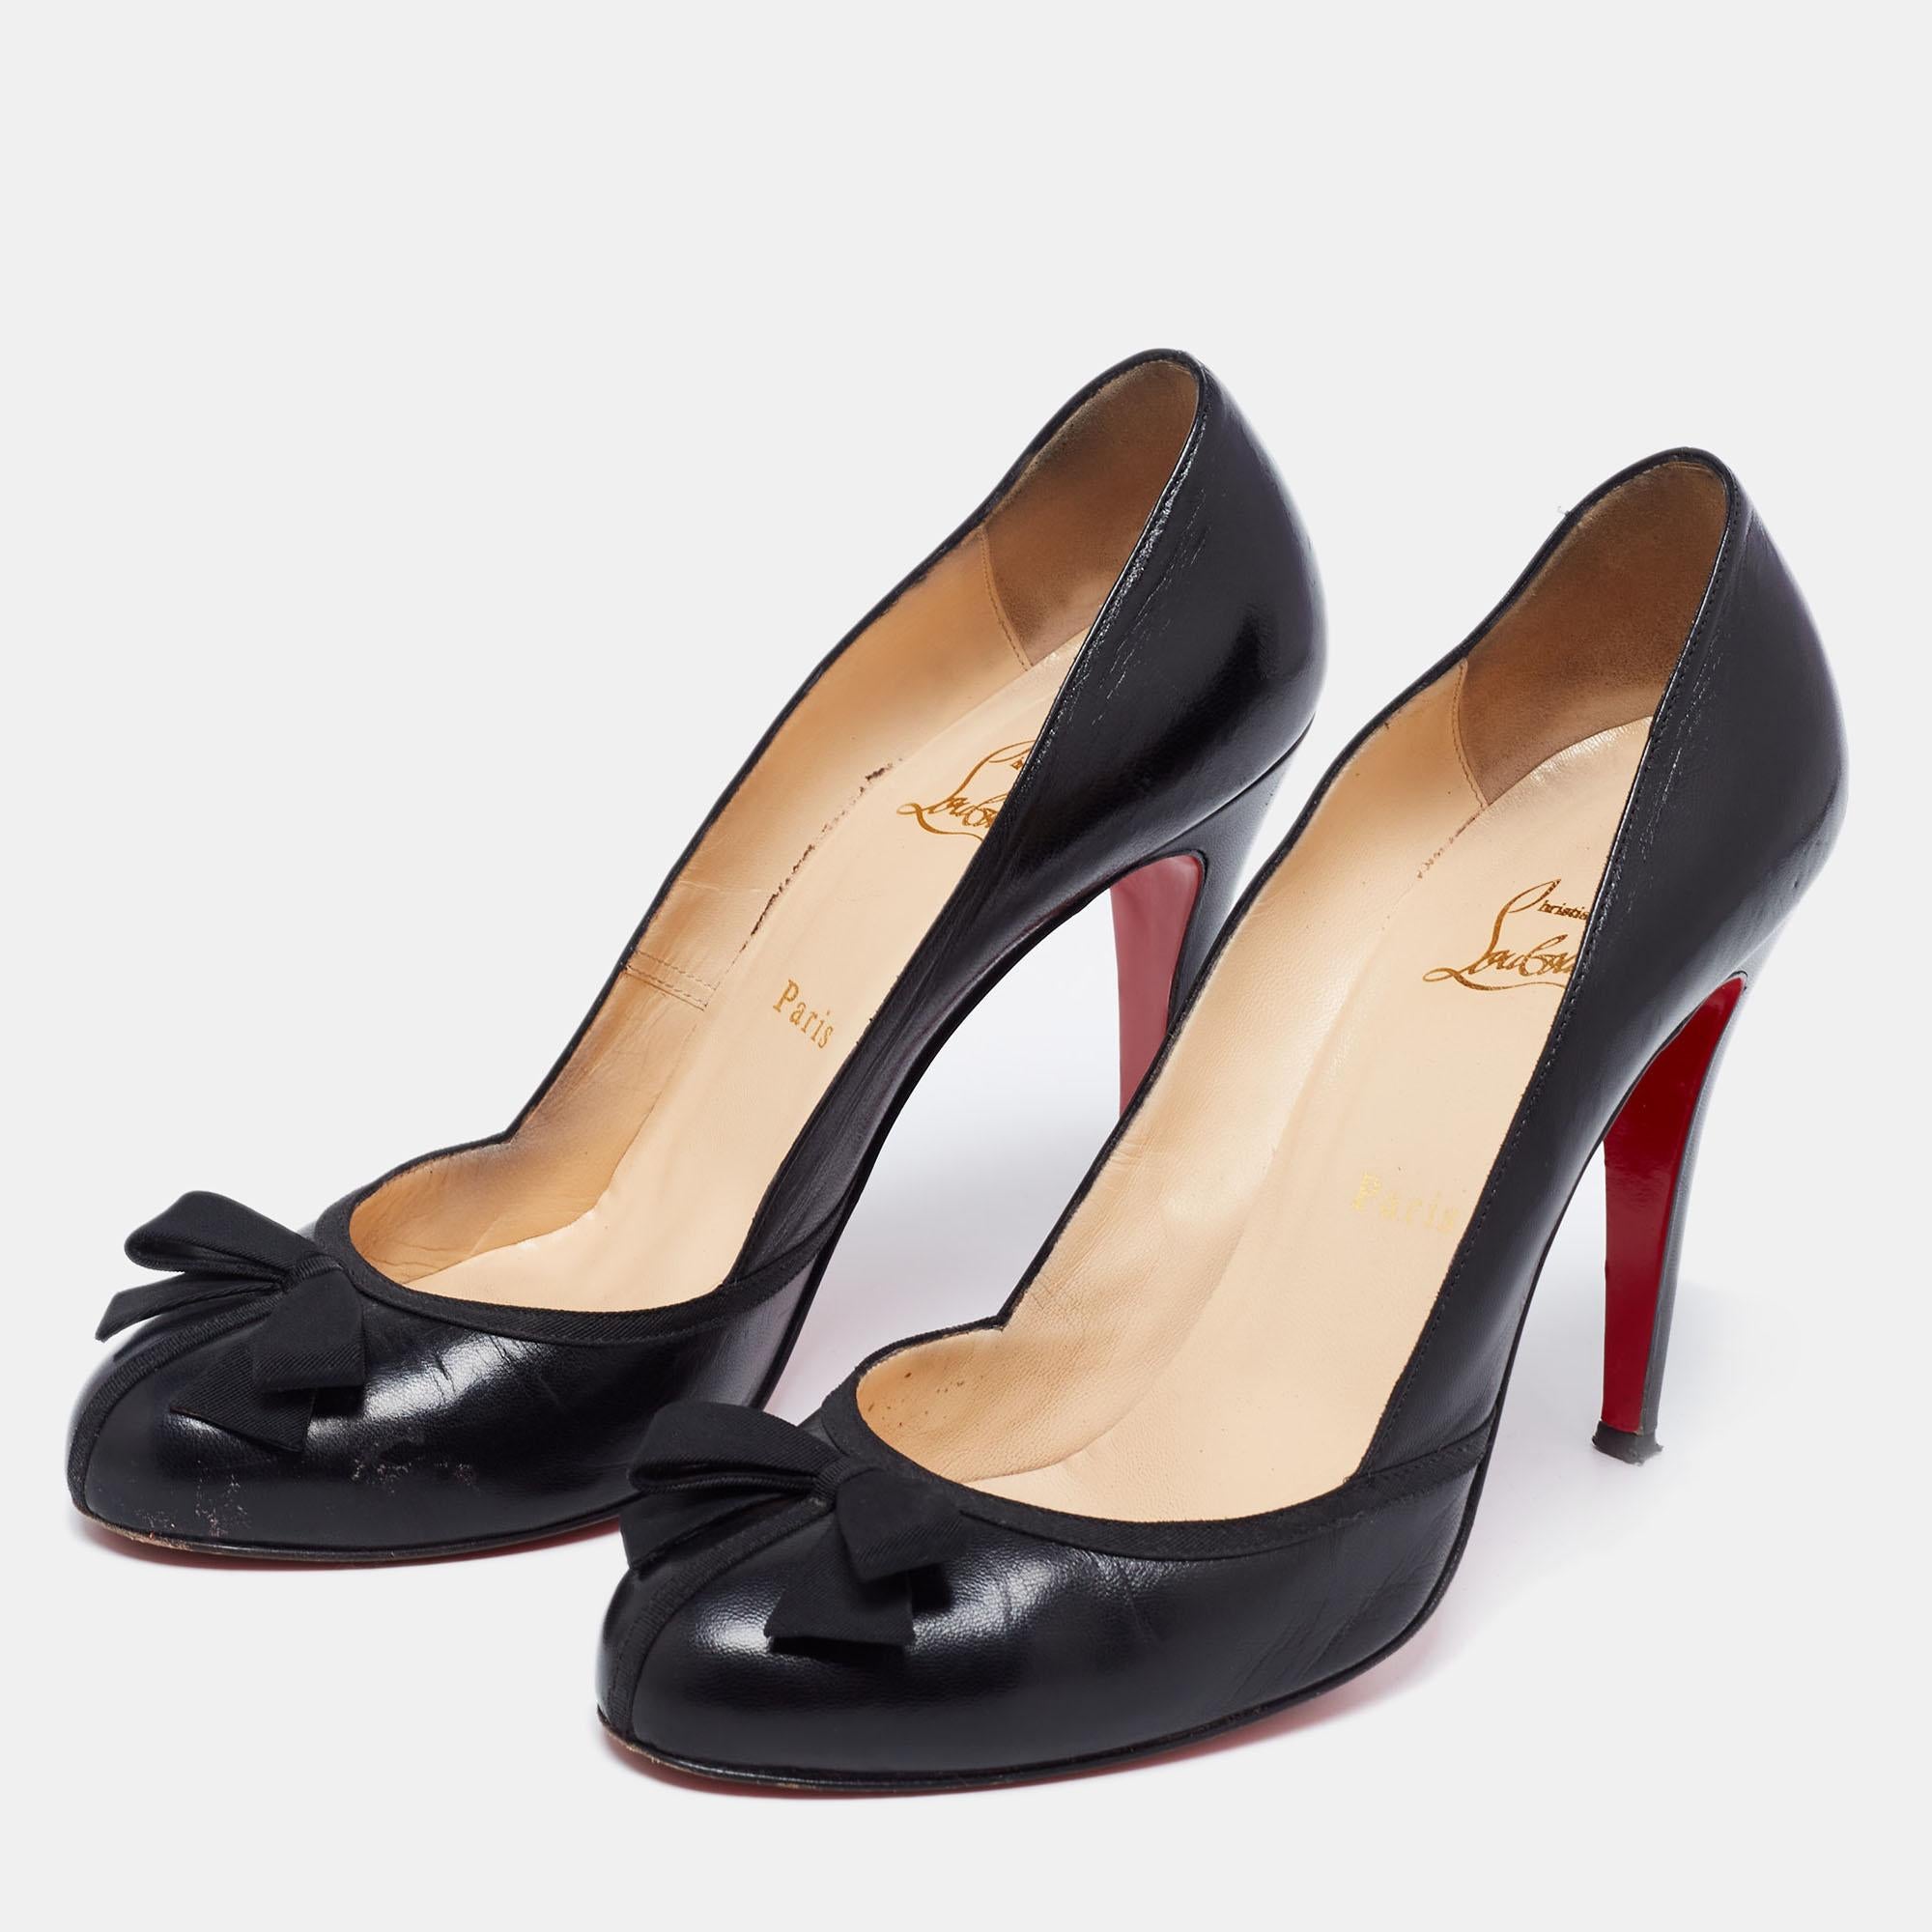 Women's Christian Louboutin Black Leather Fabric Bow Lavalliere Round-Toe Pumps Size 41